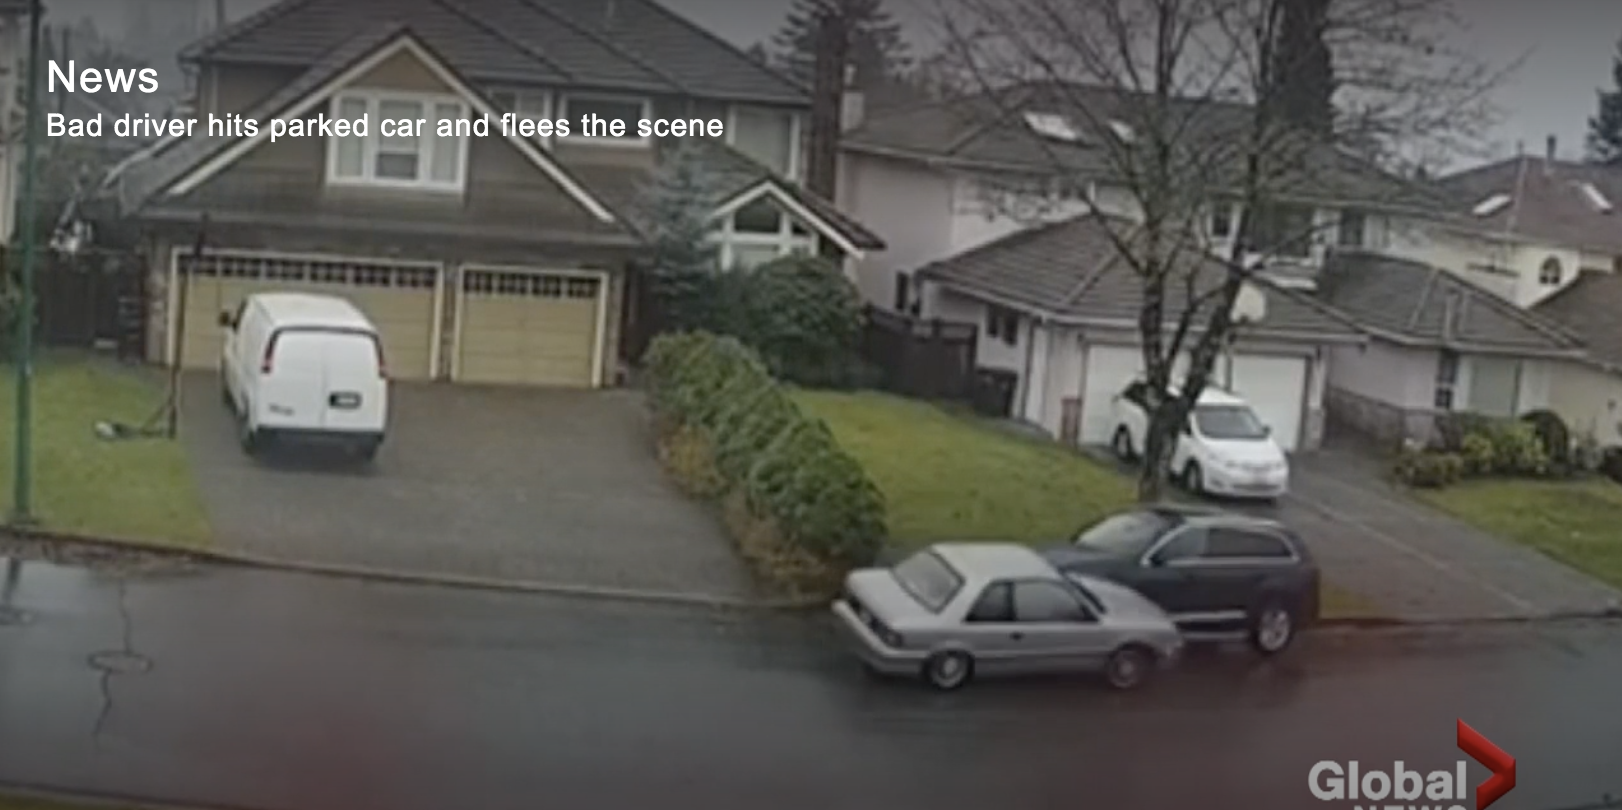 Grant on Global News: Video captures hit-and-run driver slam head-on into parked car in Burnaby